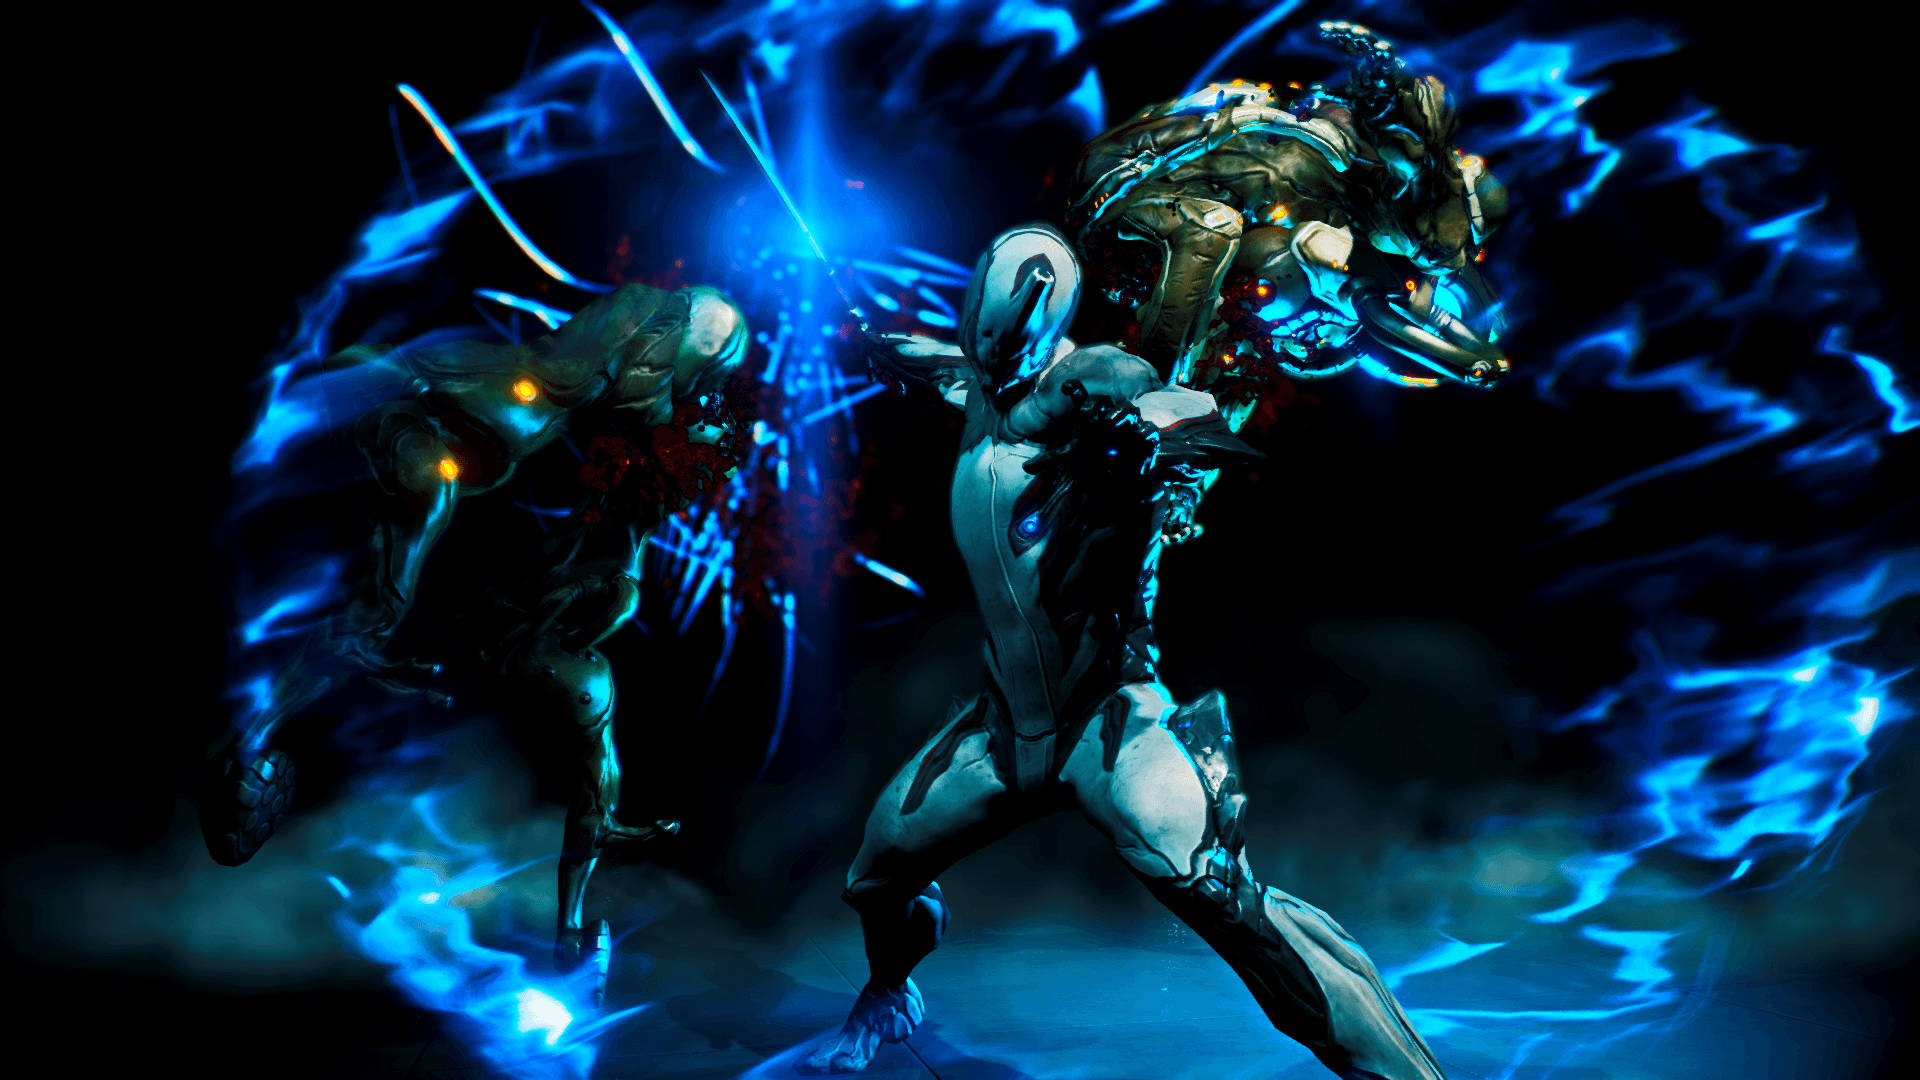 Unlock the power of the Tenno and become a masterful ancient warrior. Wallpaper